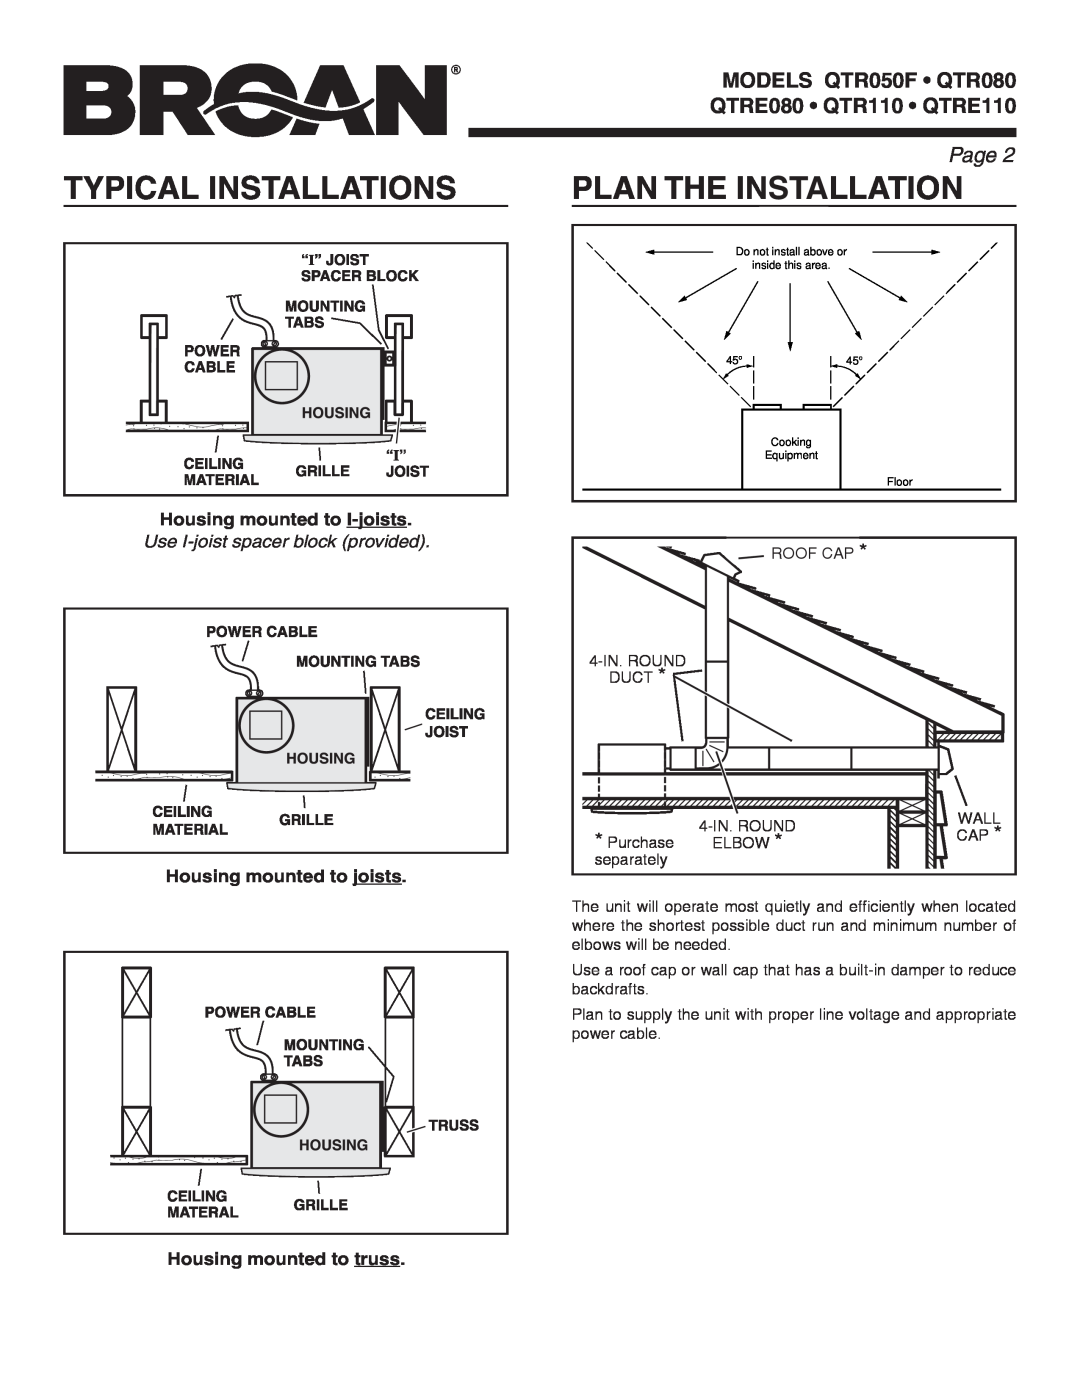 Broan QTR110, QTRE110, QTRE080, QTR080 Typical Installations, Plan The Installation, Page , Housing mounted to I-joists 